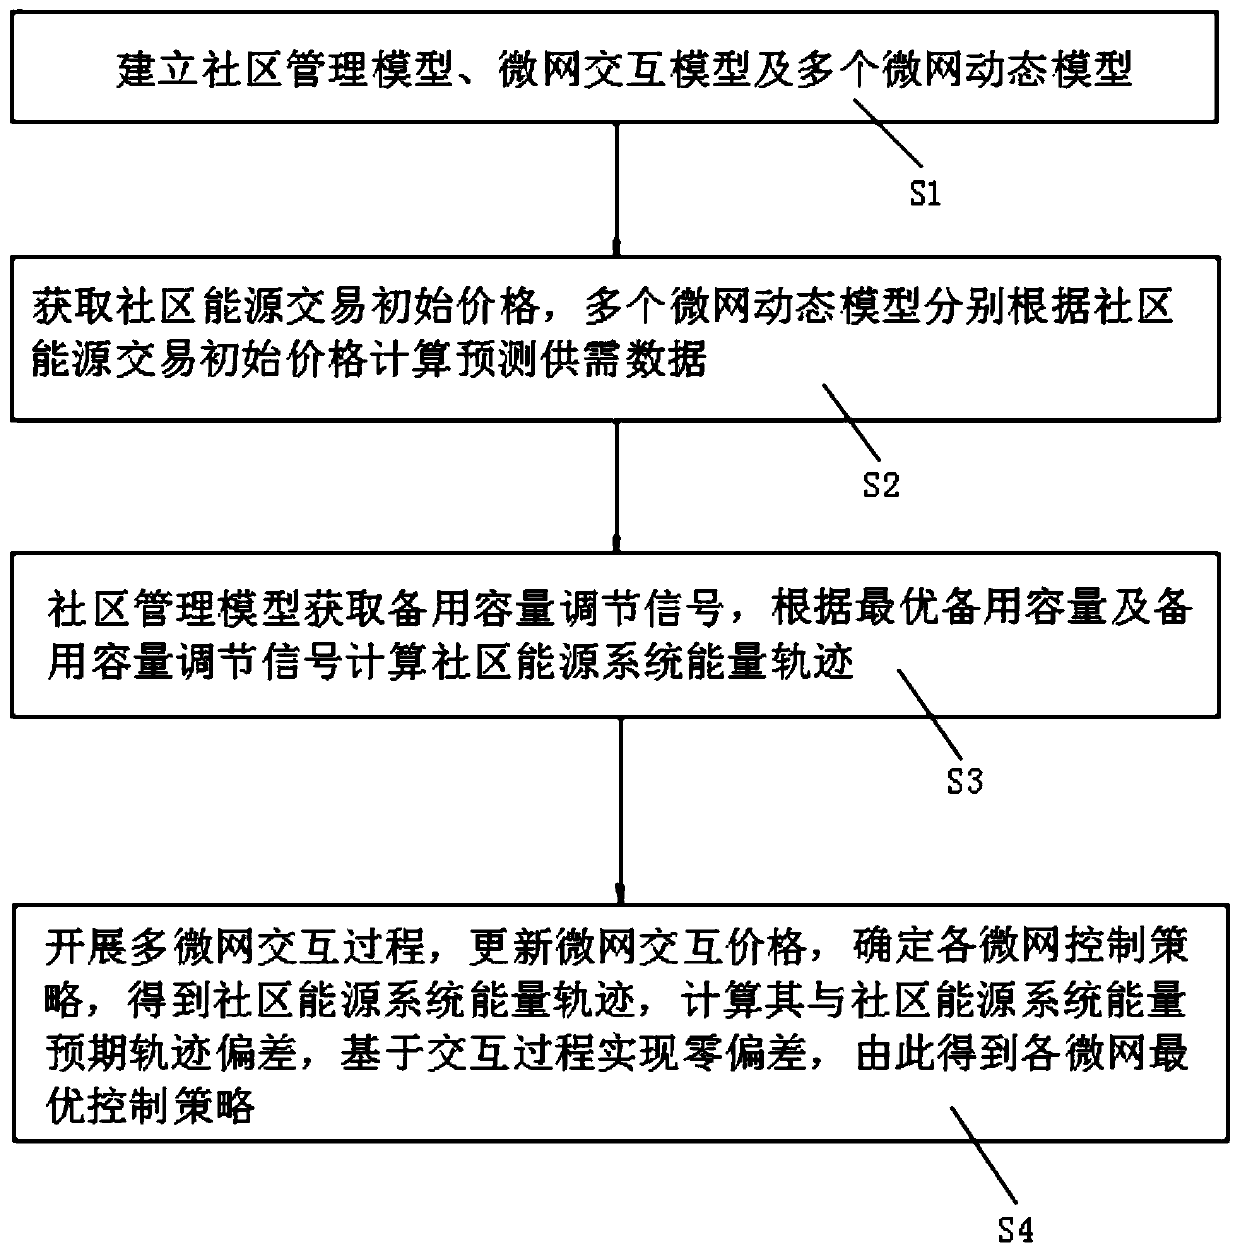 Distributed community energy transaction system and method based on adaptive consensus mechanism